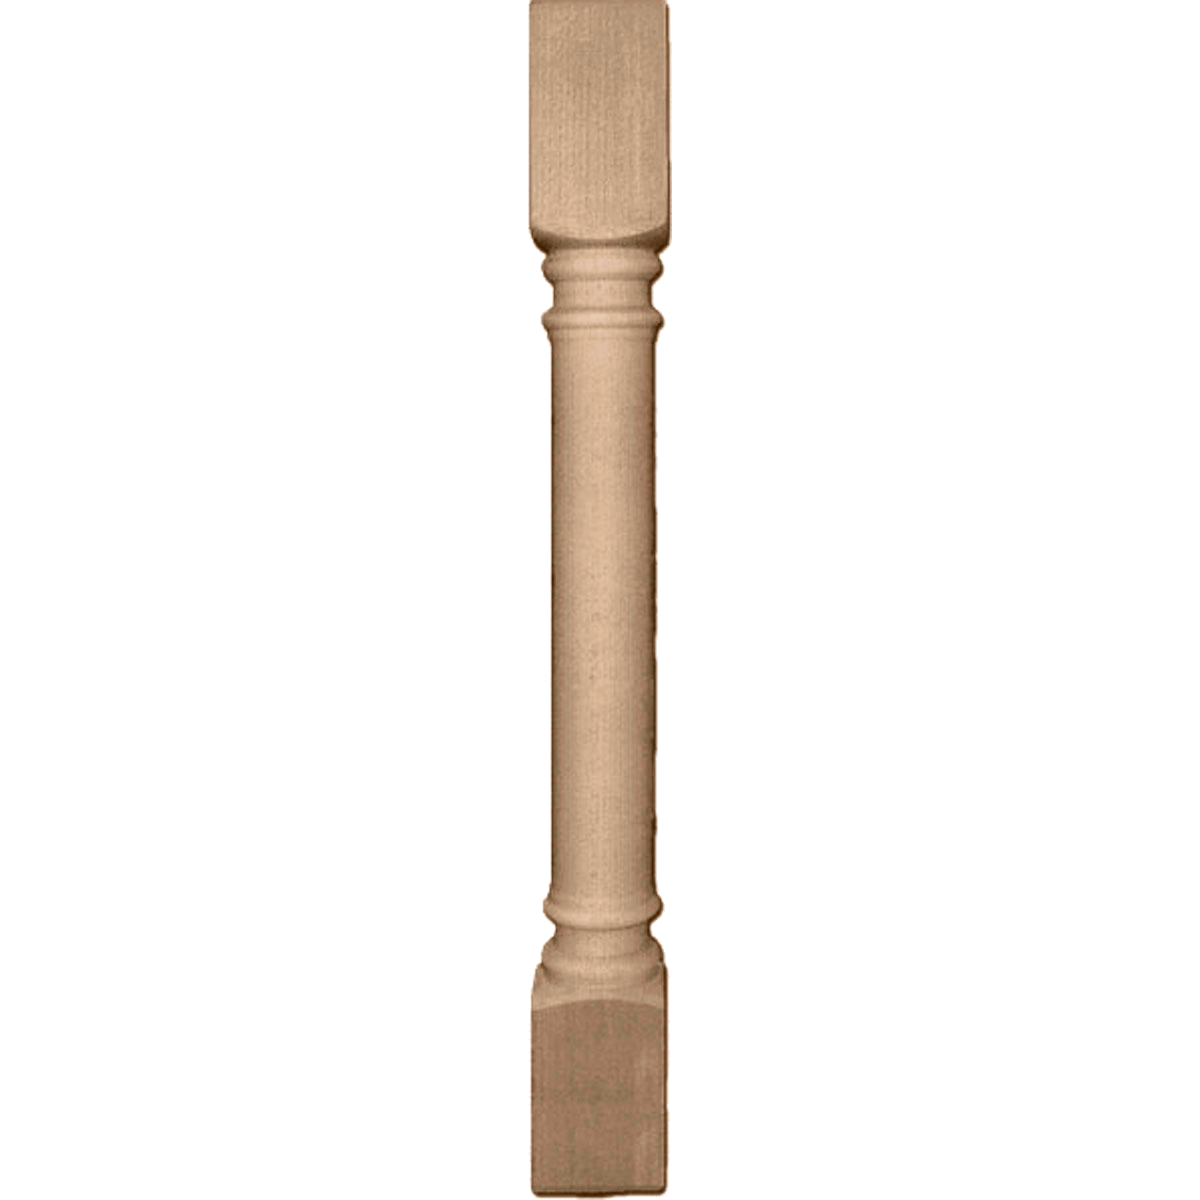 Traditional cabinet column